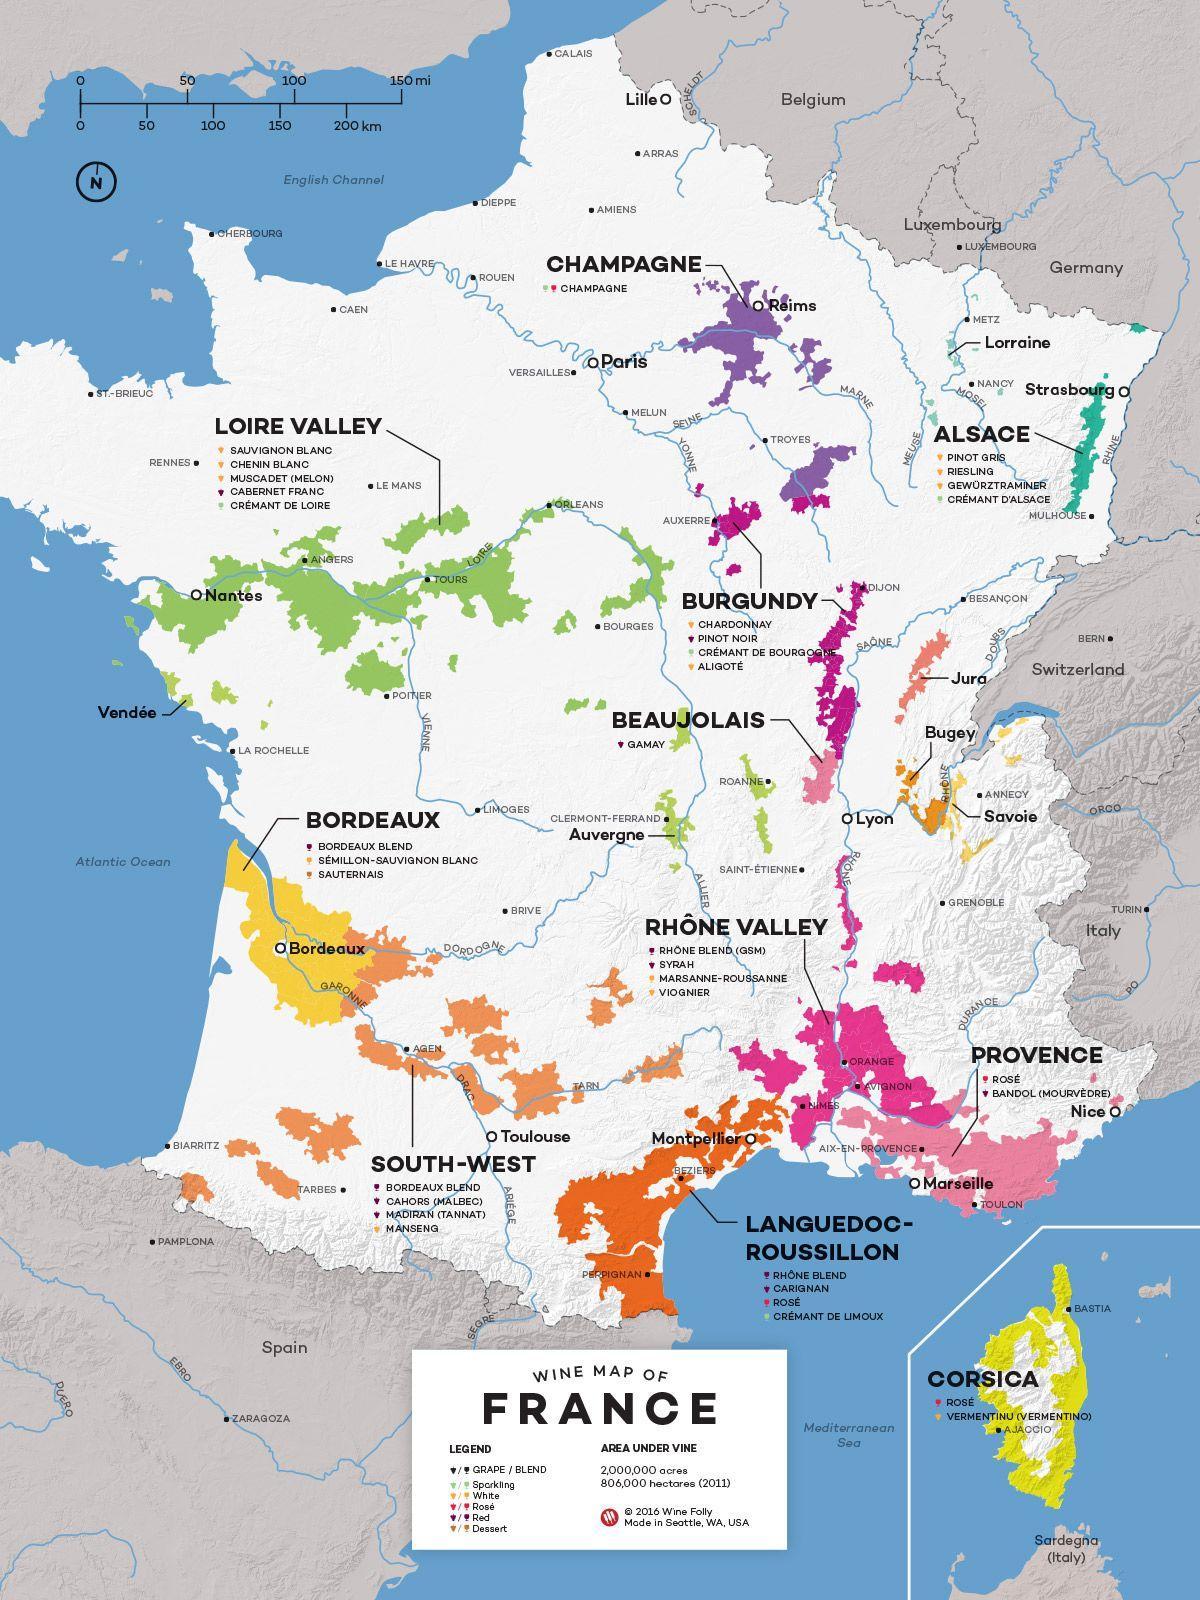 France wine country map